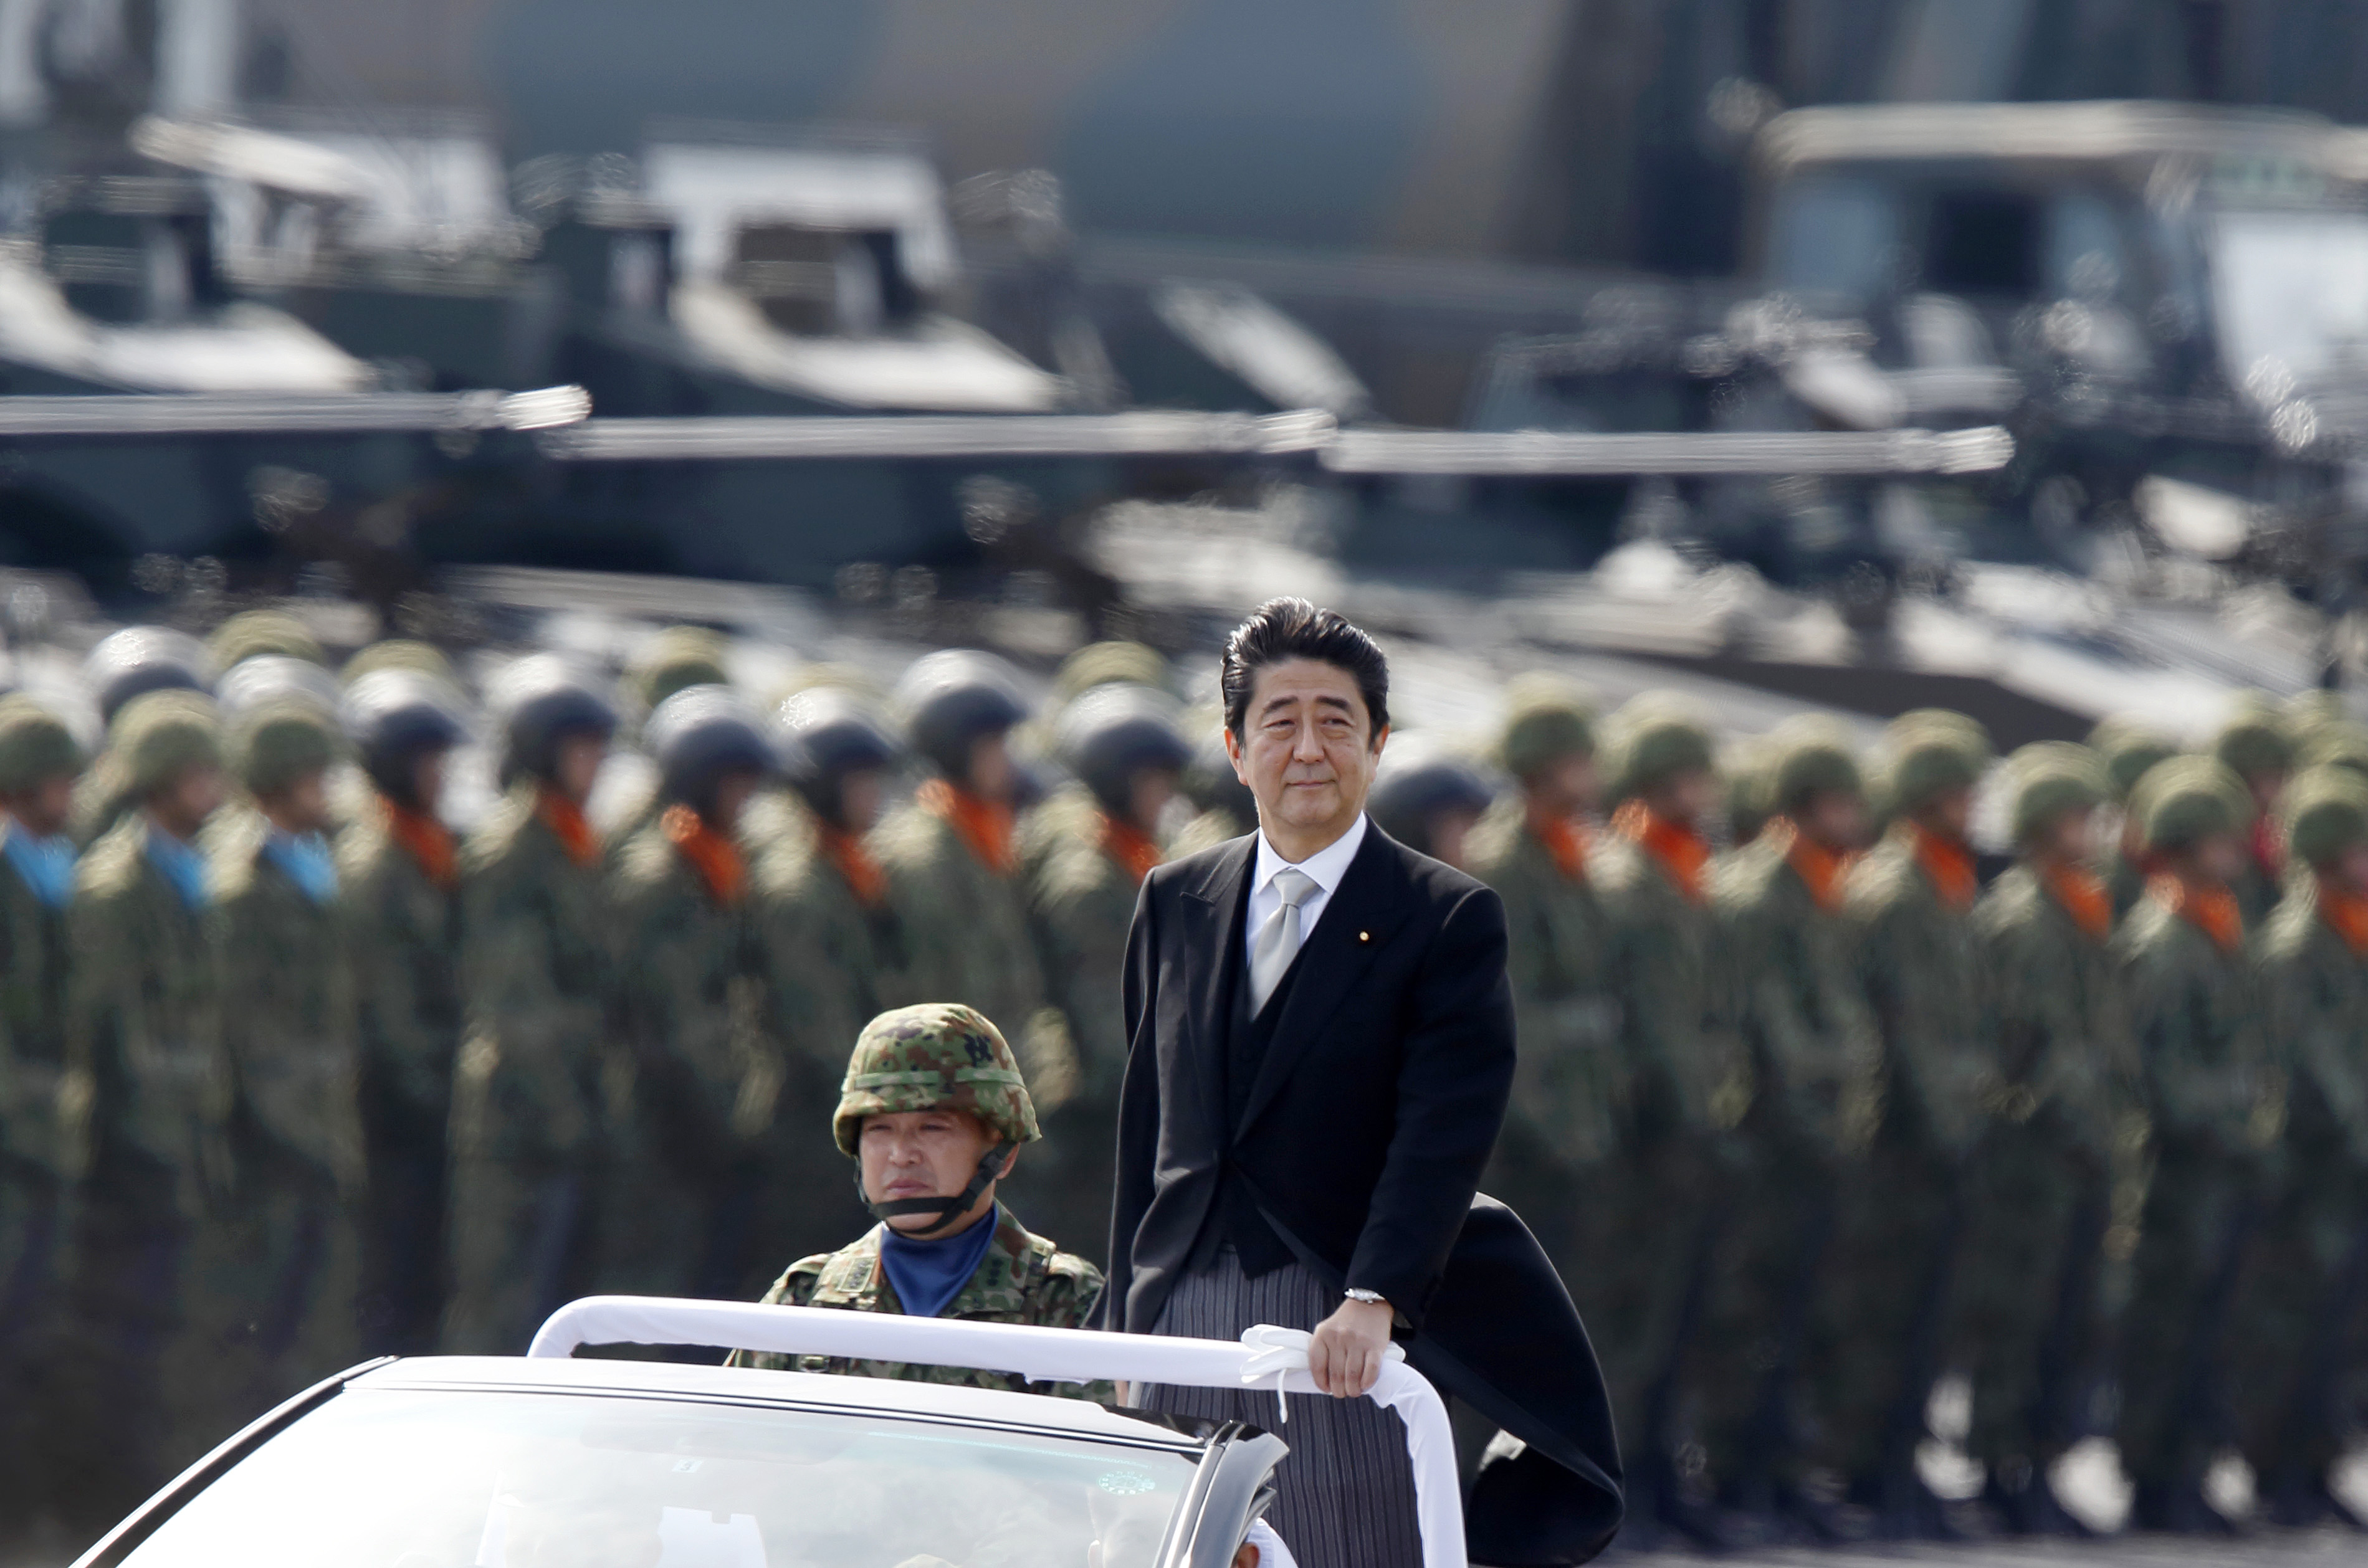 Japanese Prime Minister Shinzo Abe at the Japan Ground Self-Defense Force Camp in Asaka, Japan, on Oct. 23, 2016. (Tomohiro Ohsumi—Getty Images)